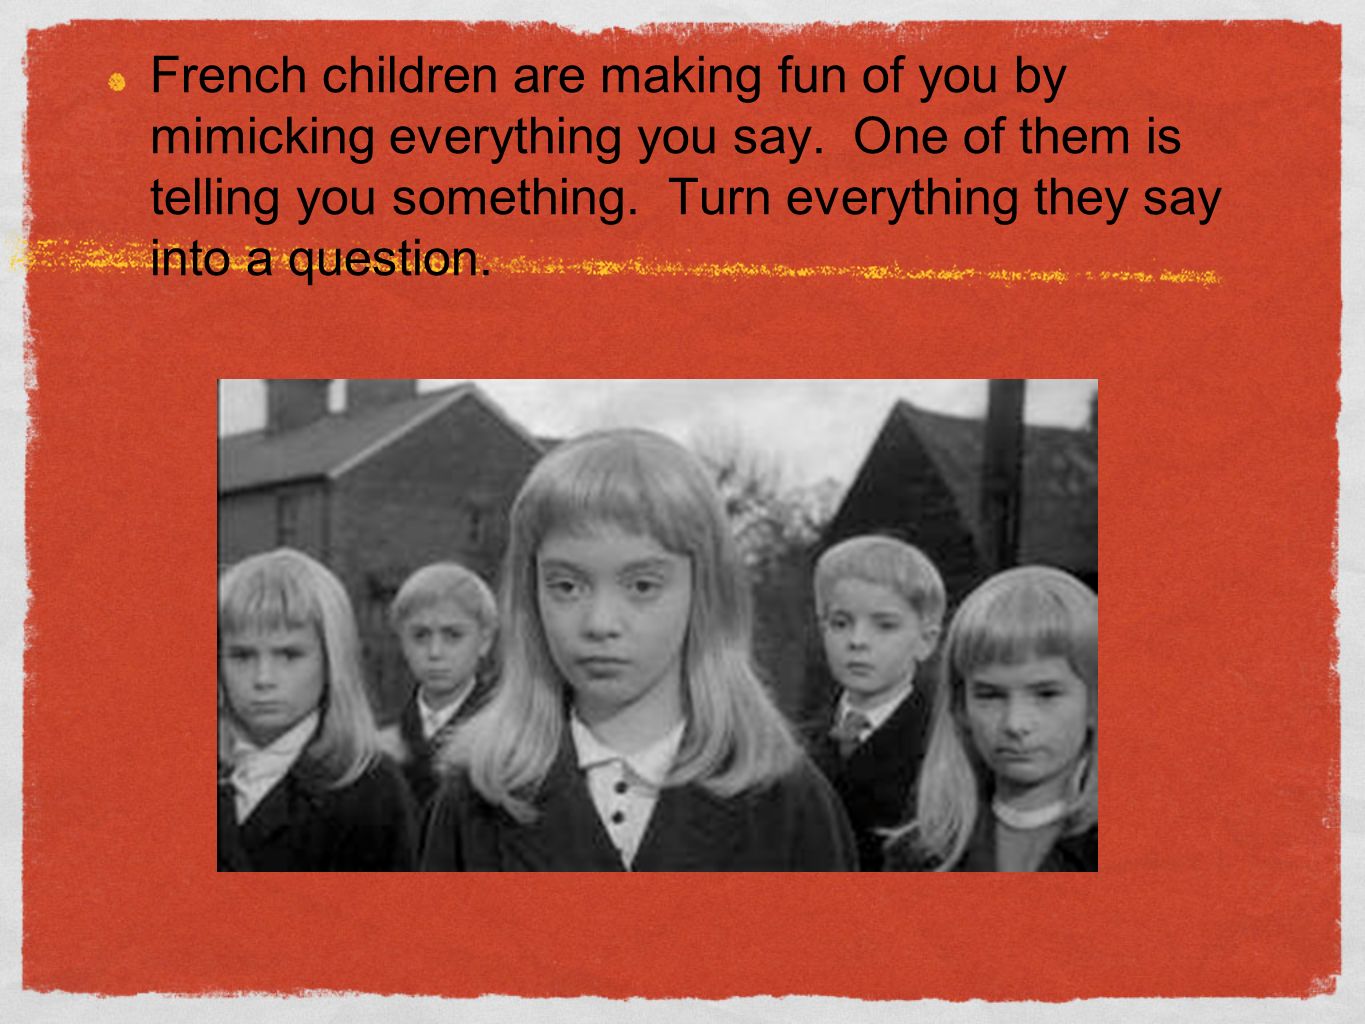 French children are making fun of you by mimicking everything you say.